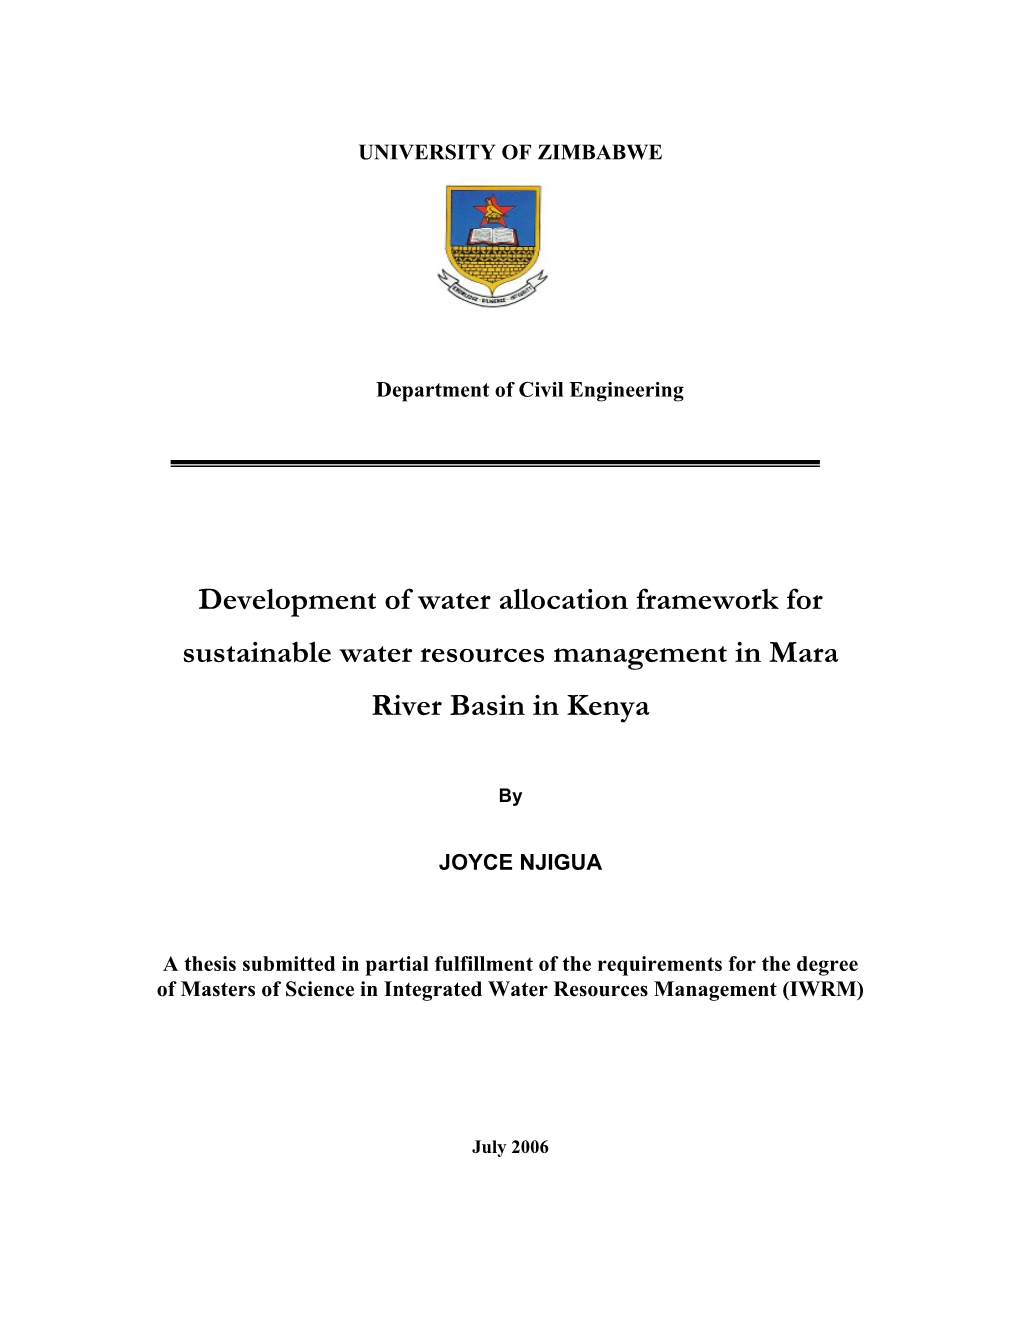 Development of Water Allocation Framework for Sustainable Water Resources Management in Mara River Basin in Kenya